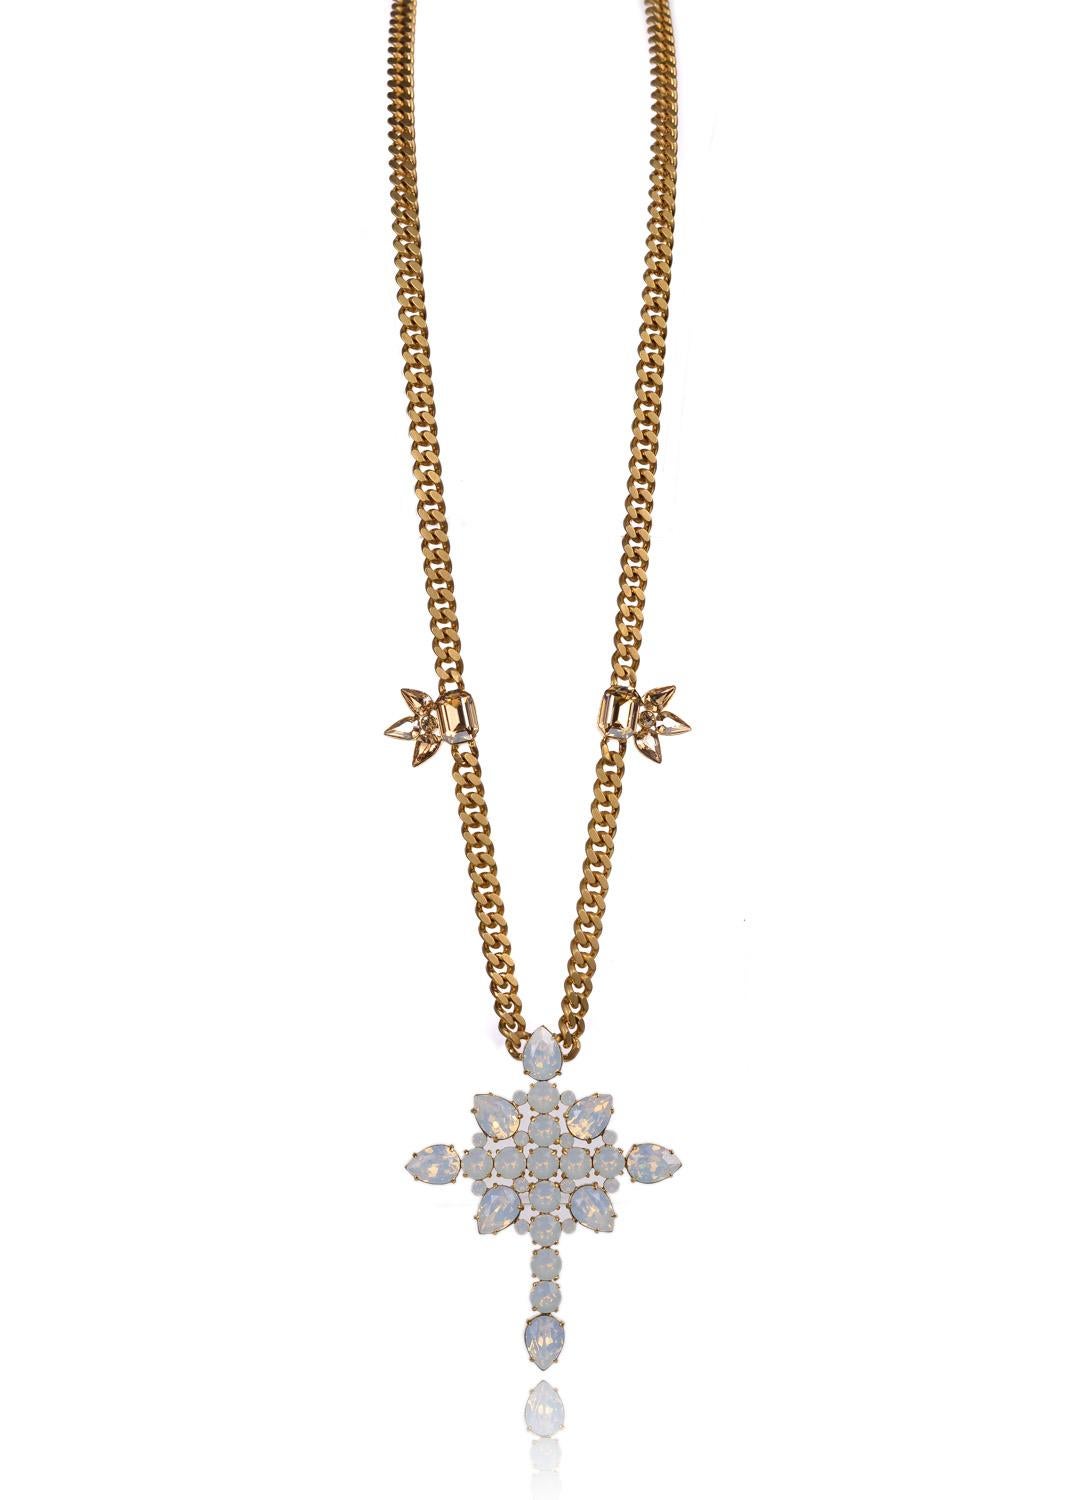 Treat yourself to Roberto Cavalli's divine creation with this Cuban Curb Cross Necklace. Roberto Cavalli's highly skilled artistry features durable gold Cuban curb links, white opal glacial reminiscent Swarovski Crystals, and Swarovski secured cross